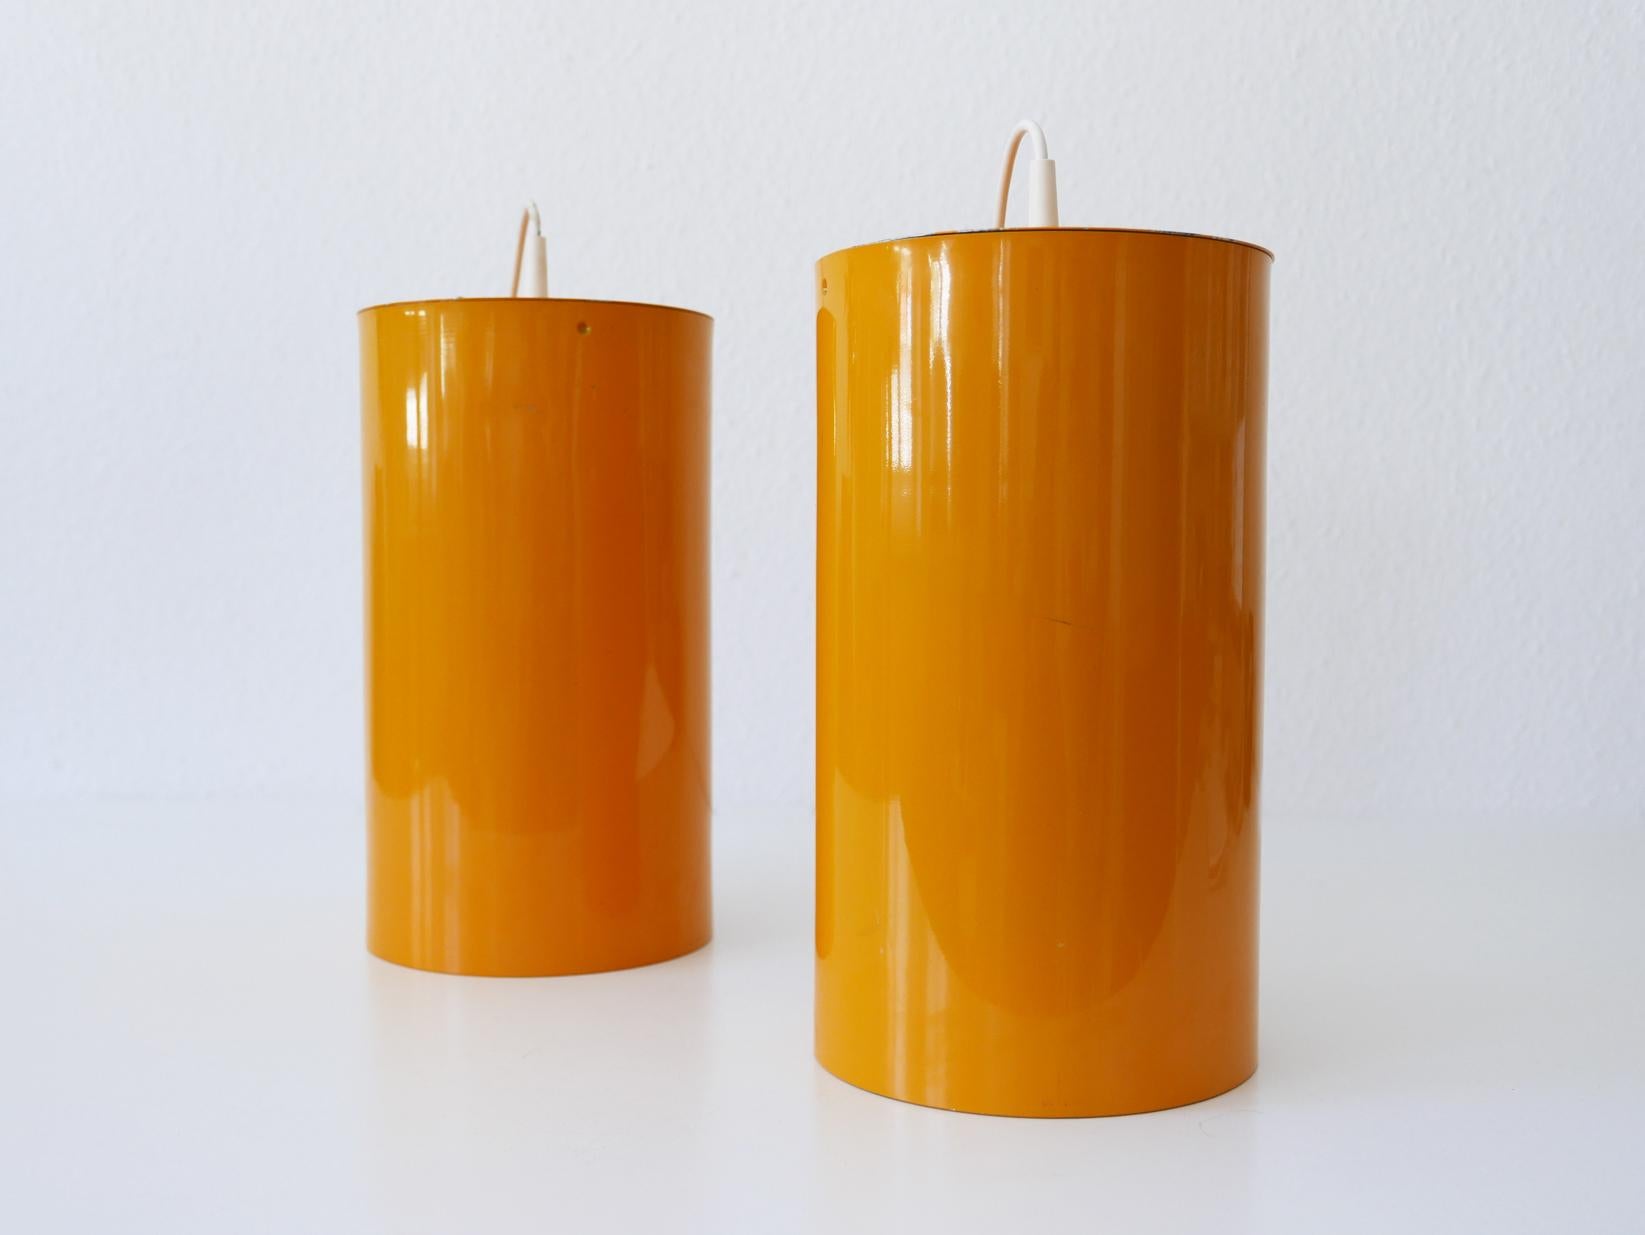 Set of Two Elegant Mid-Century Modern Pendant Lamps by Erco, 1970s, Germany For Sale 8